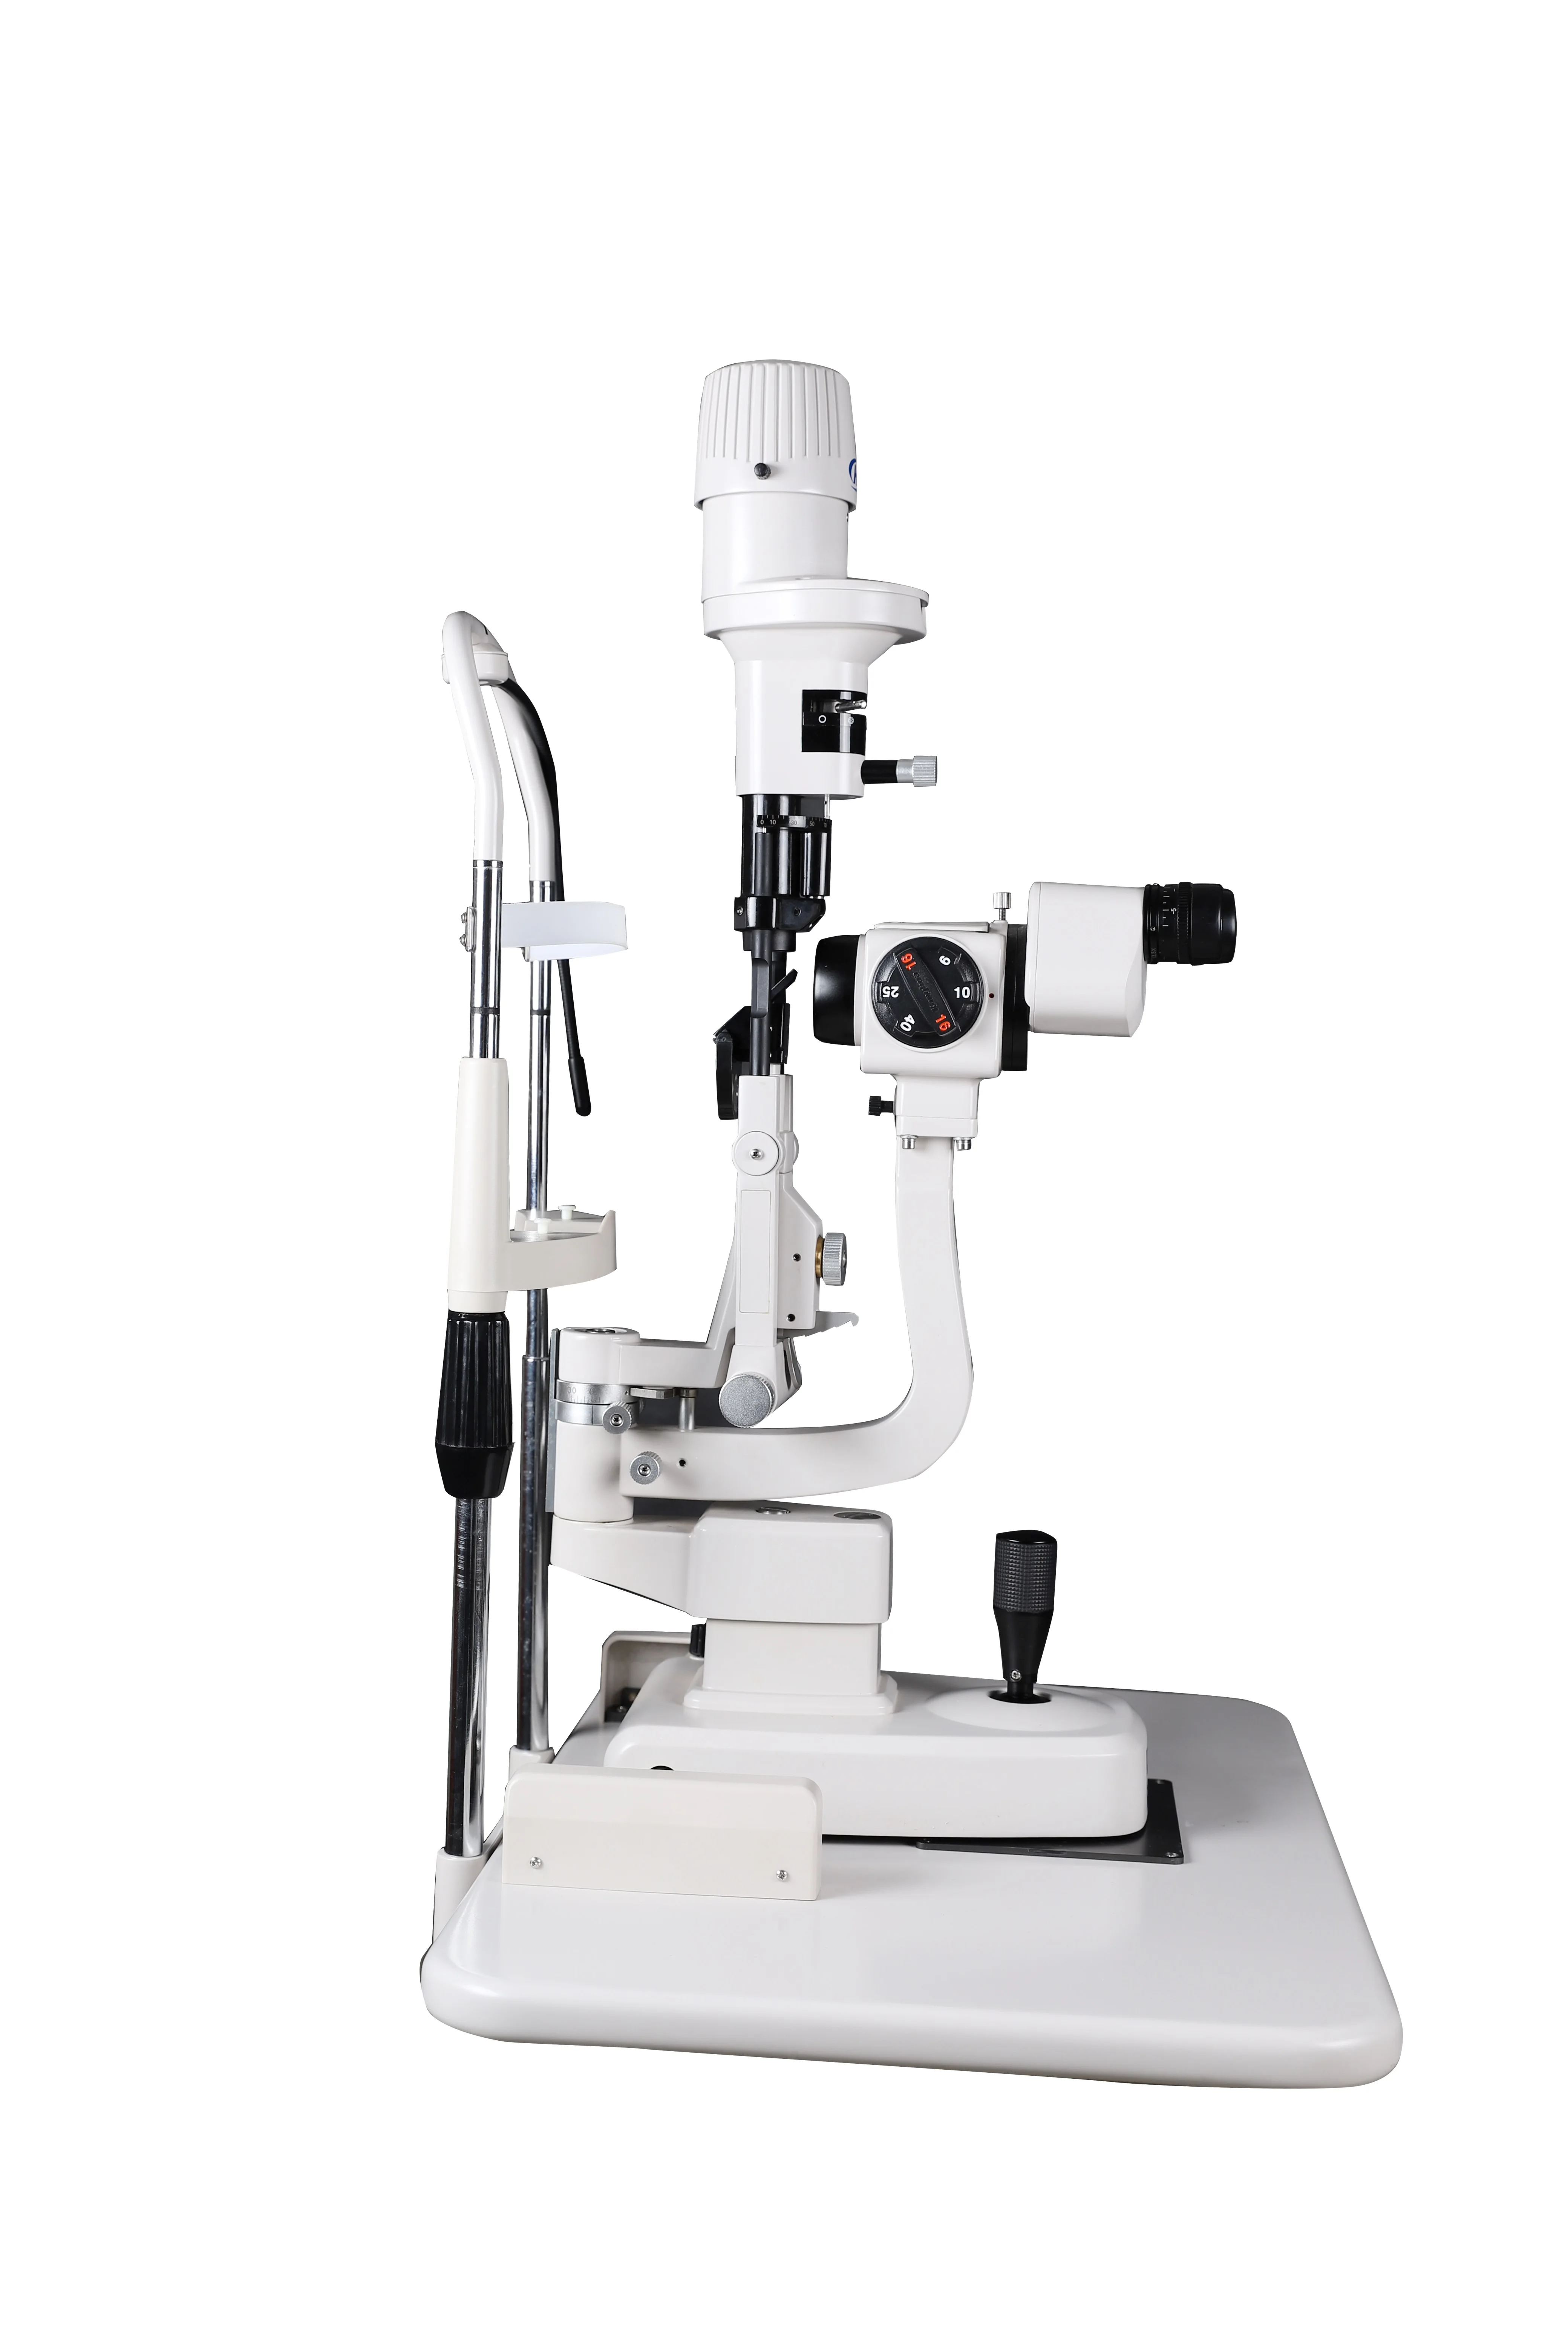 
Kanghua Made Slit Lamp Ce Free Spare Parts Slm-2er-l Electric Metal for Optometry China Carton Box 3 Years 5 Working Days 25KG 